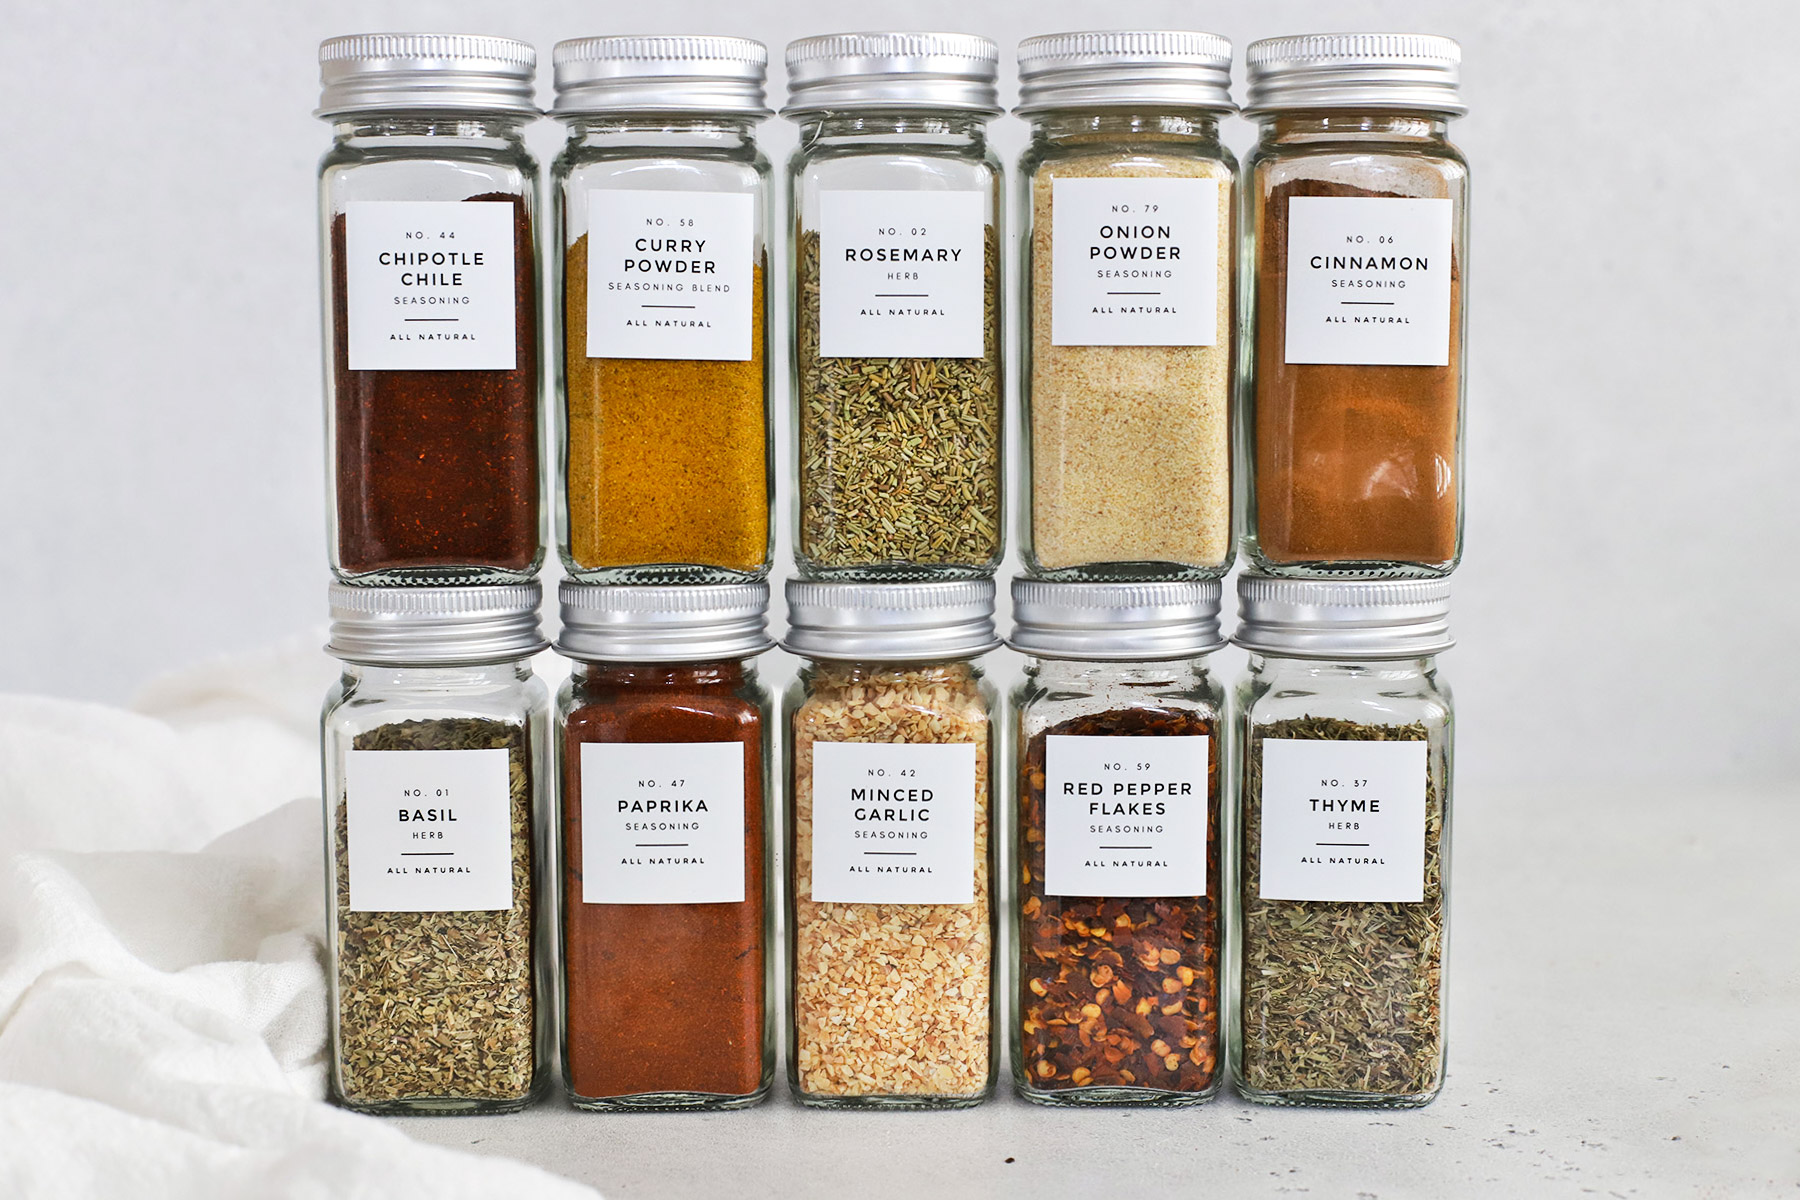 How to Organize a Spice Drawer With FREE Printable Spice Label